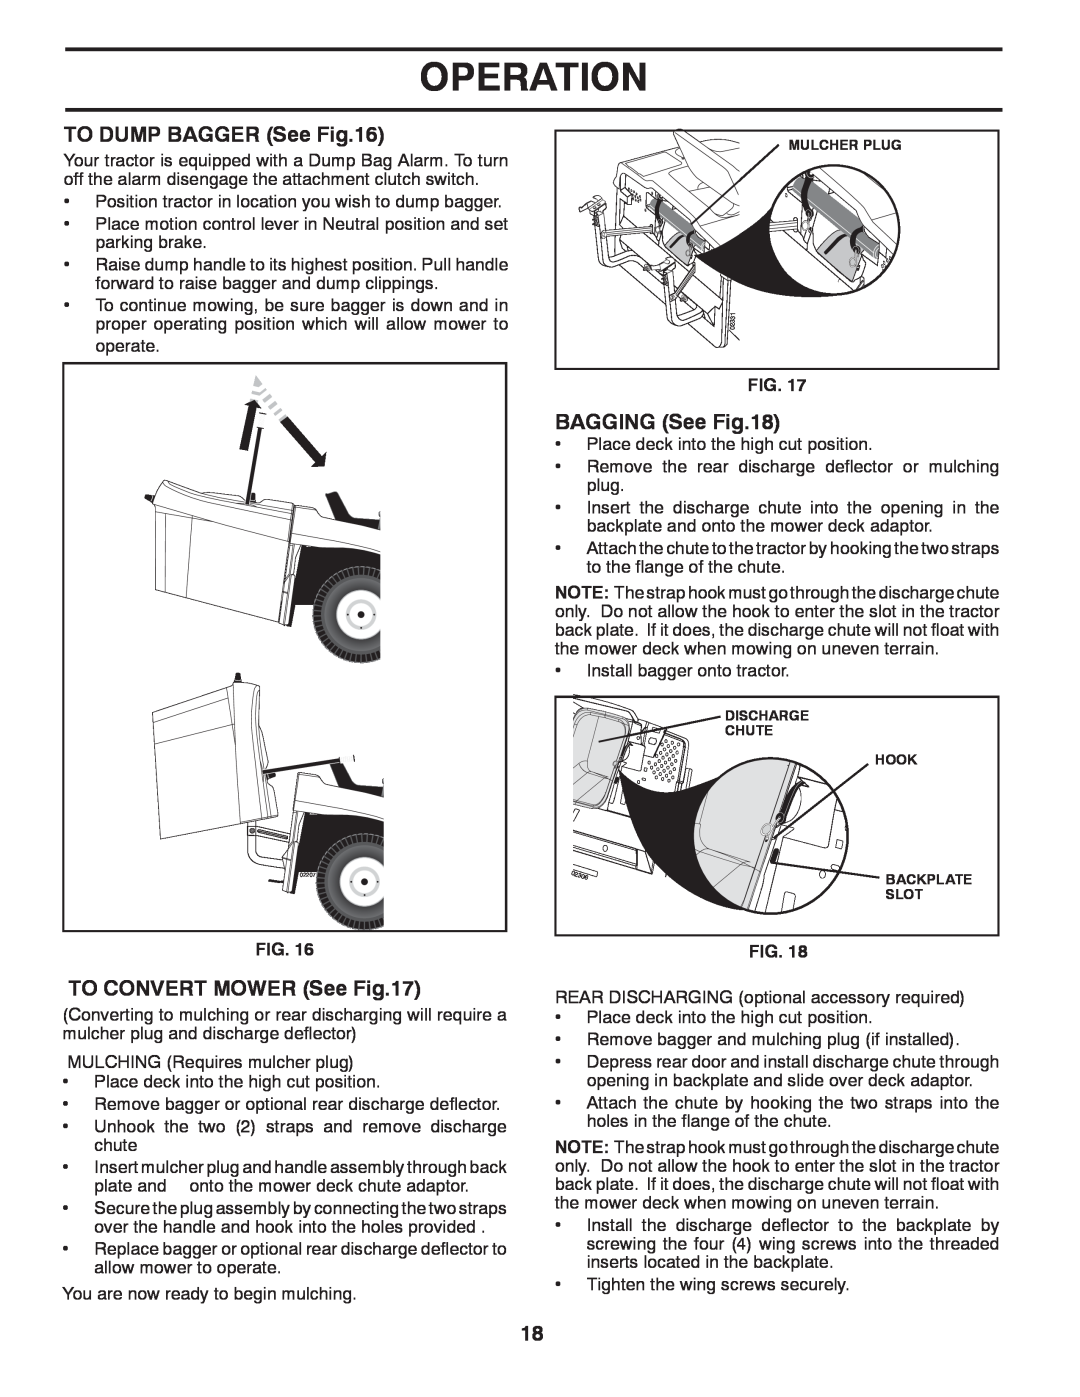 Husqvarna CTH2036 owner manual TO DUMP BAGGER See, BAGGING See, TO CONVERT MOWER See, Operation 